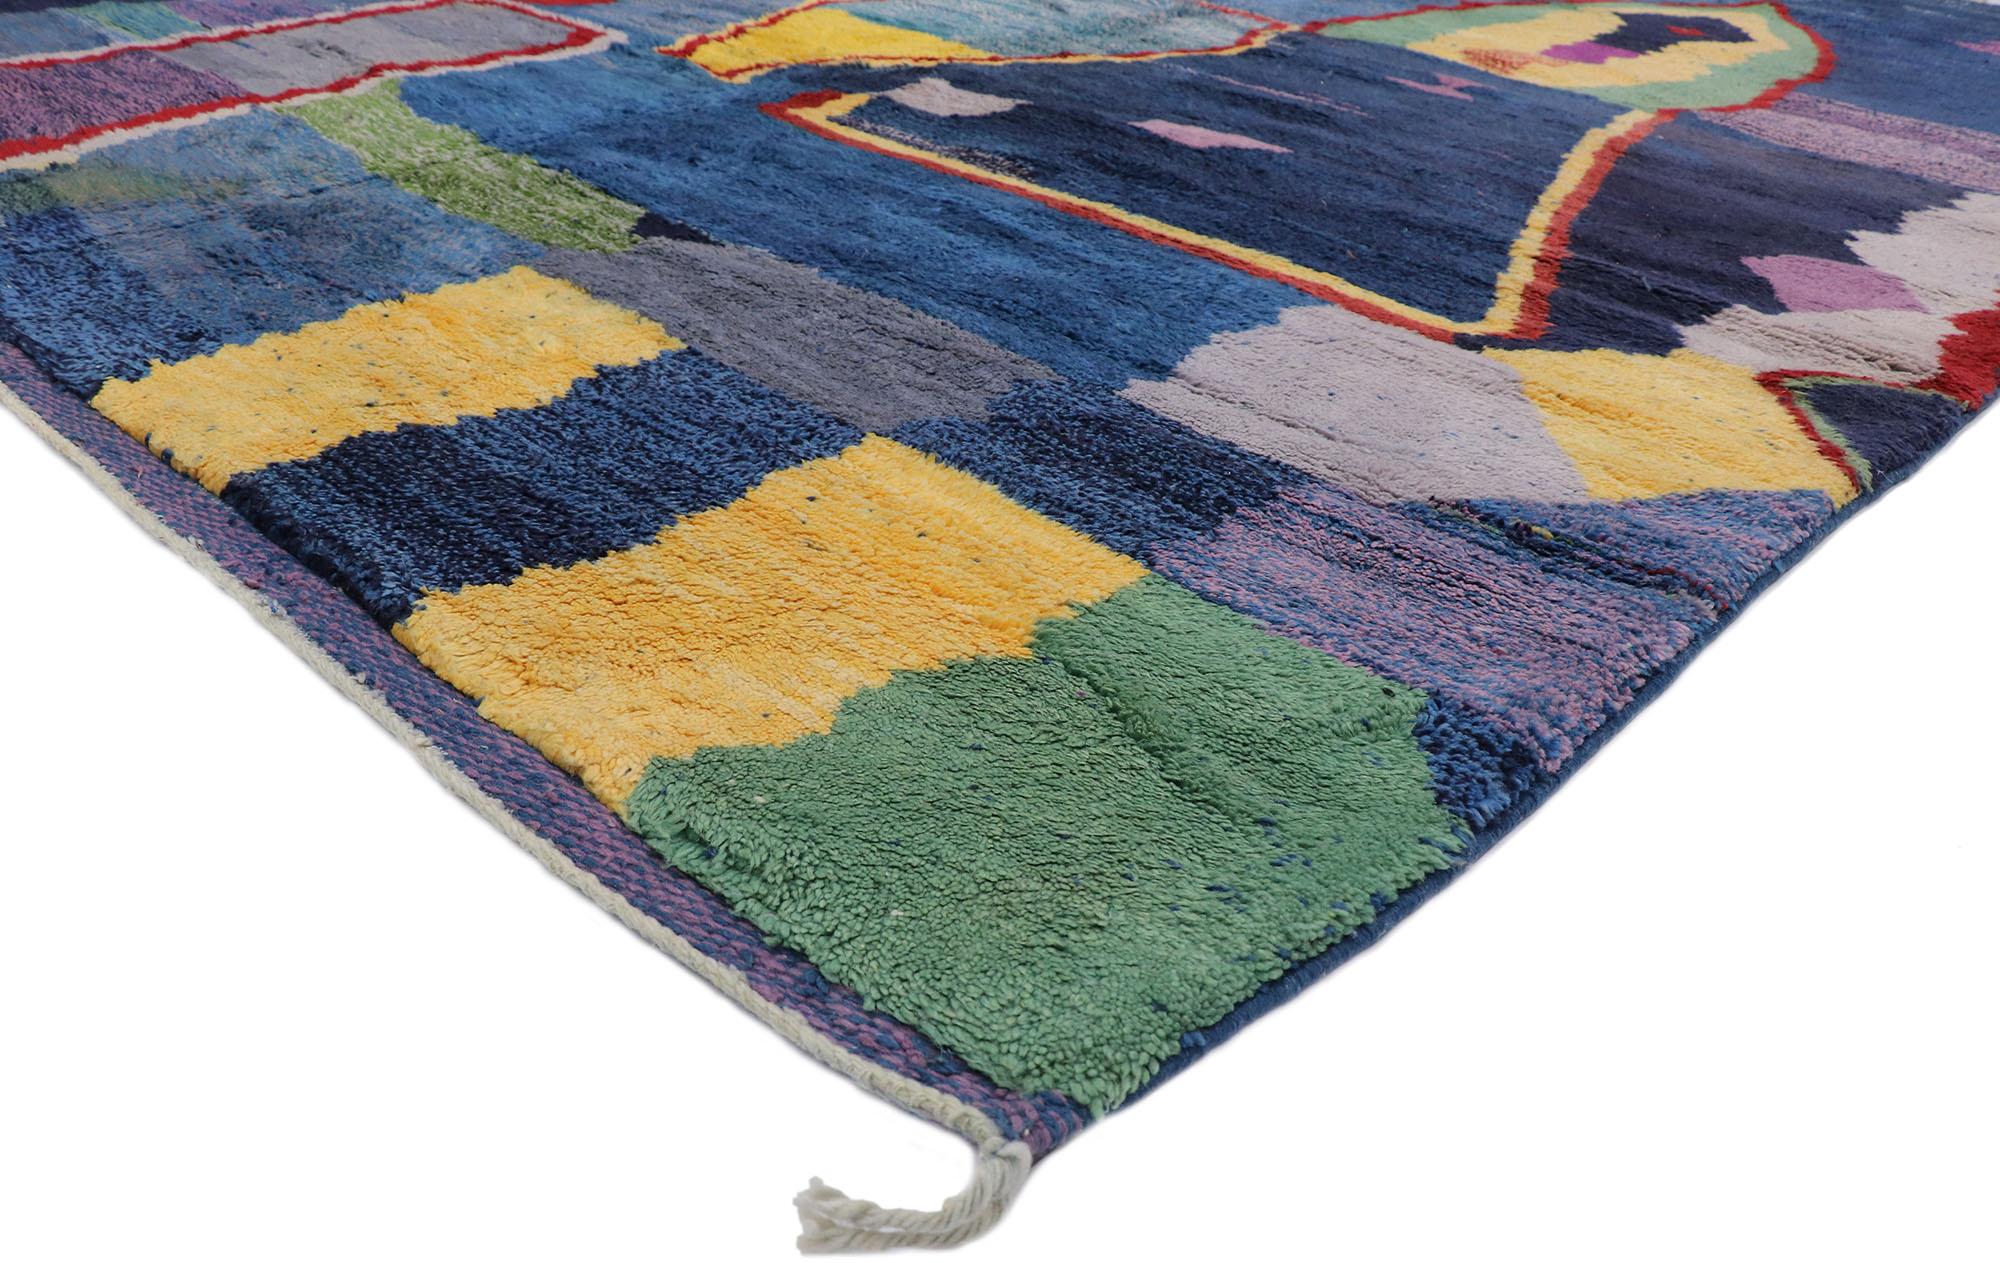 21105 Large Authentic Berber Abstract Moroccan Rug, 10'01 x 12'02.
Abstract Expressionism marries nomadic charm in this hand knotted wool Berber Moroccan rug. The visual complexity and vibrant colors woven into this piece work together creating a